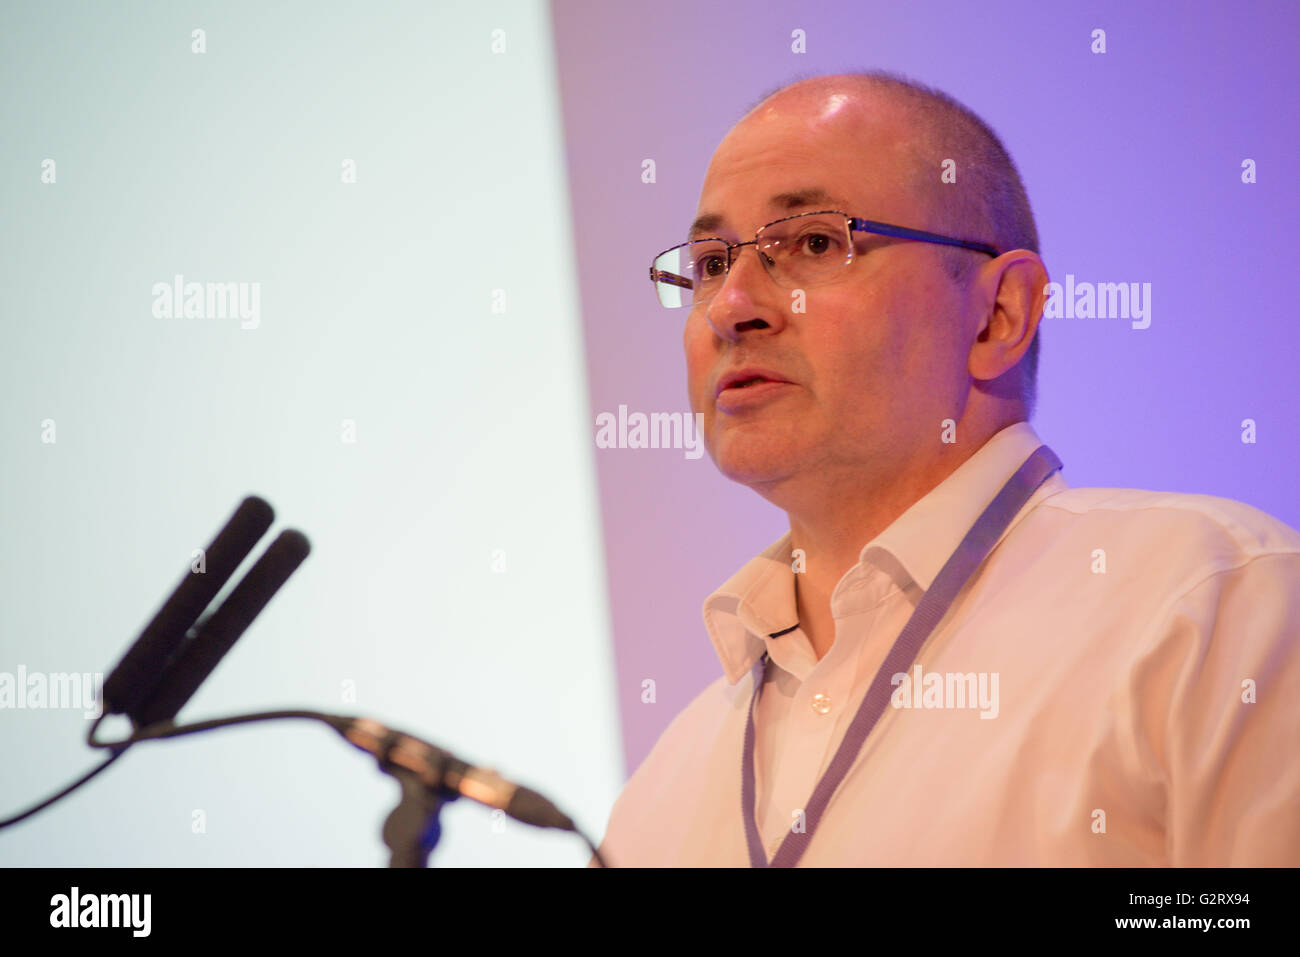 Jamie Hogg, Business Community Partner, Royal Bank of Scotland speaking at conference Stock Photo